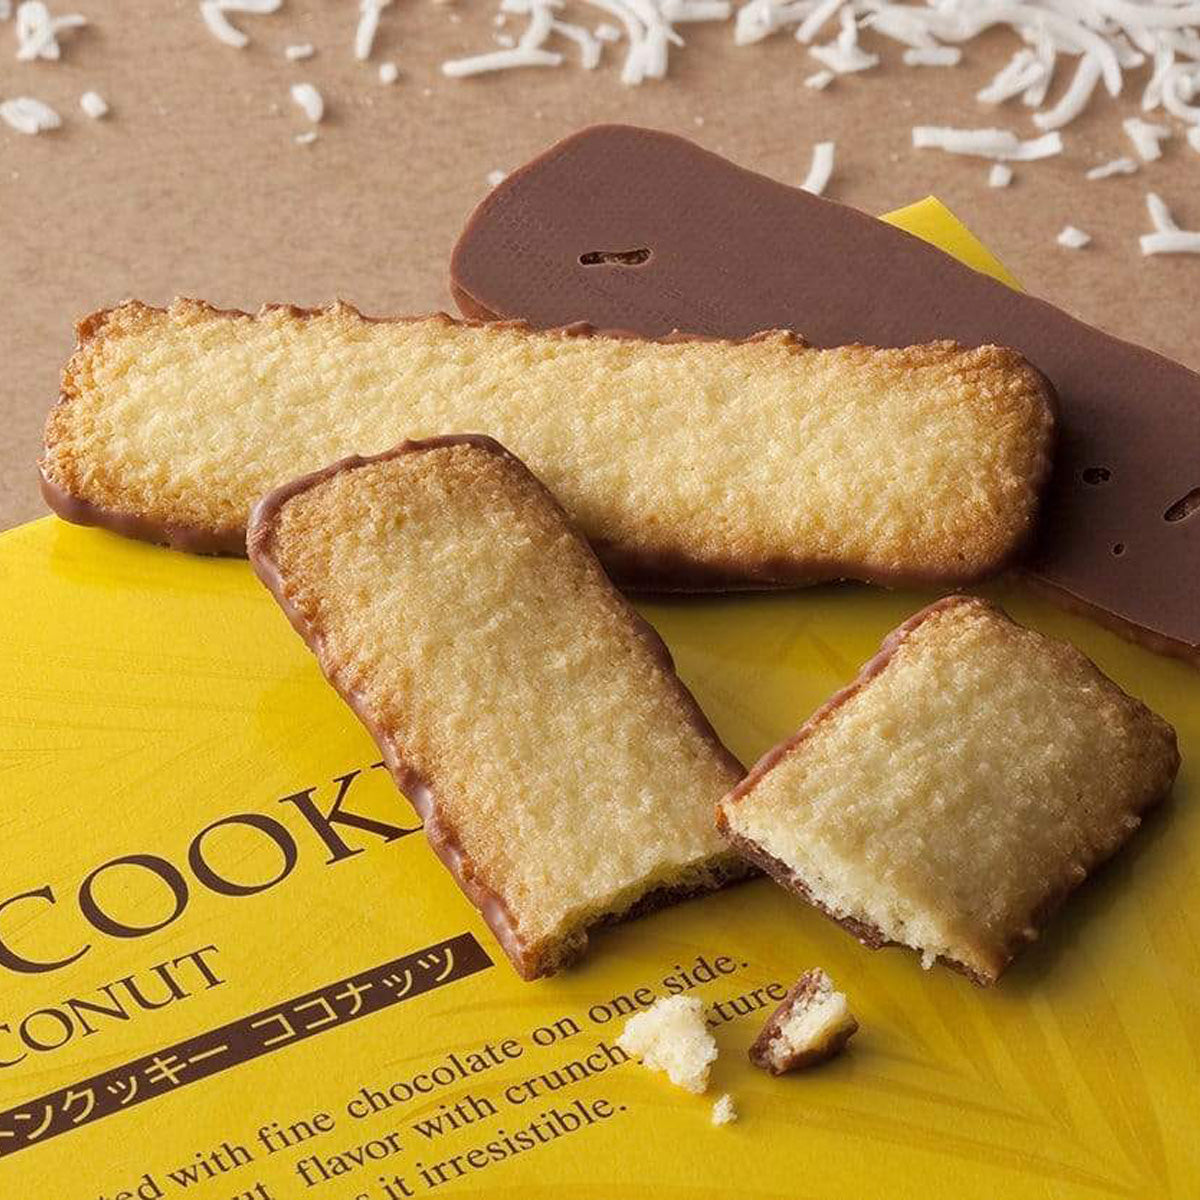 ROYCE' Chocolate - Baton Cookies "Coconut" - Image shows golden cookies with brown chocolate coating on a yellow box with letters and white coconut shavings in the background. 